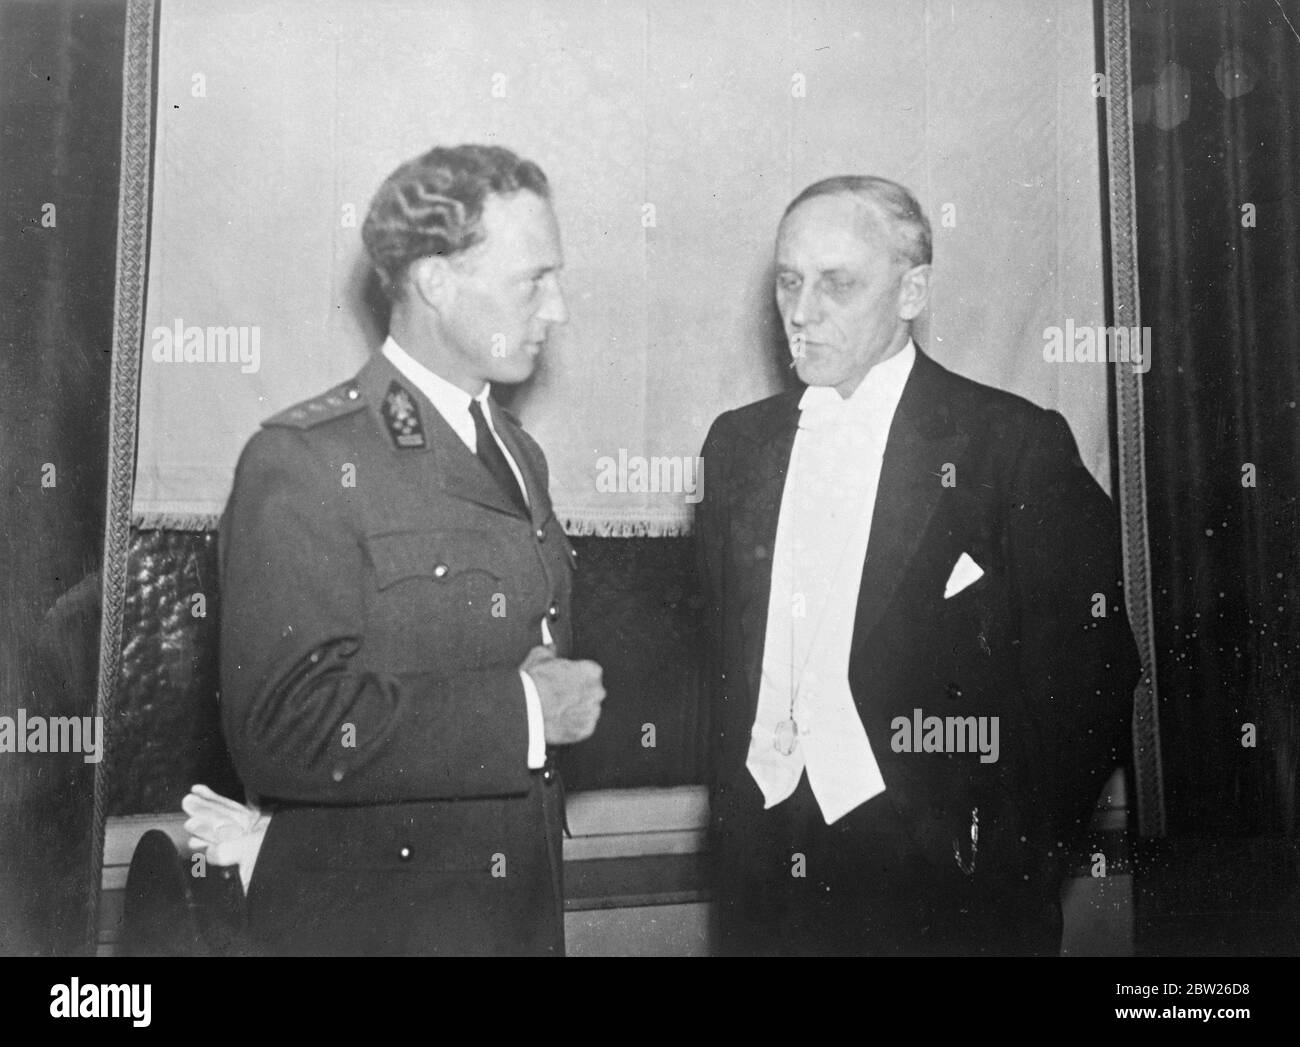 King Leopold attends lecture in Brussels by English professor. King Leopold of the Belgians, was an interested member of the audience when an Englishman, Prof George Ingle Finch, lectured at the Union Colonial in Brussels on 'From the Alps to Everest'. Photo shows, King Leopold, talking with Prof George Ingle Finch at the Union Colonial, Brussels. 28 January 1938 Stock Photo